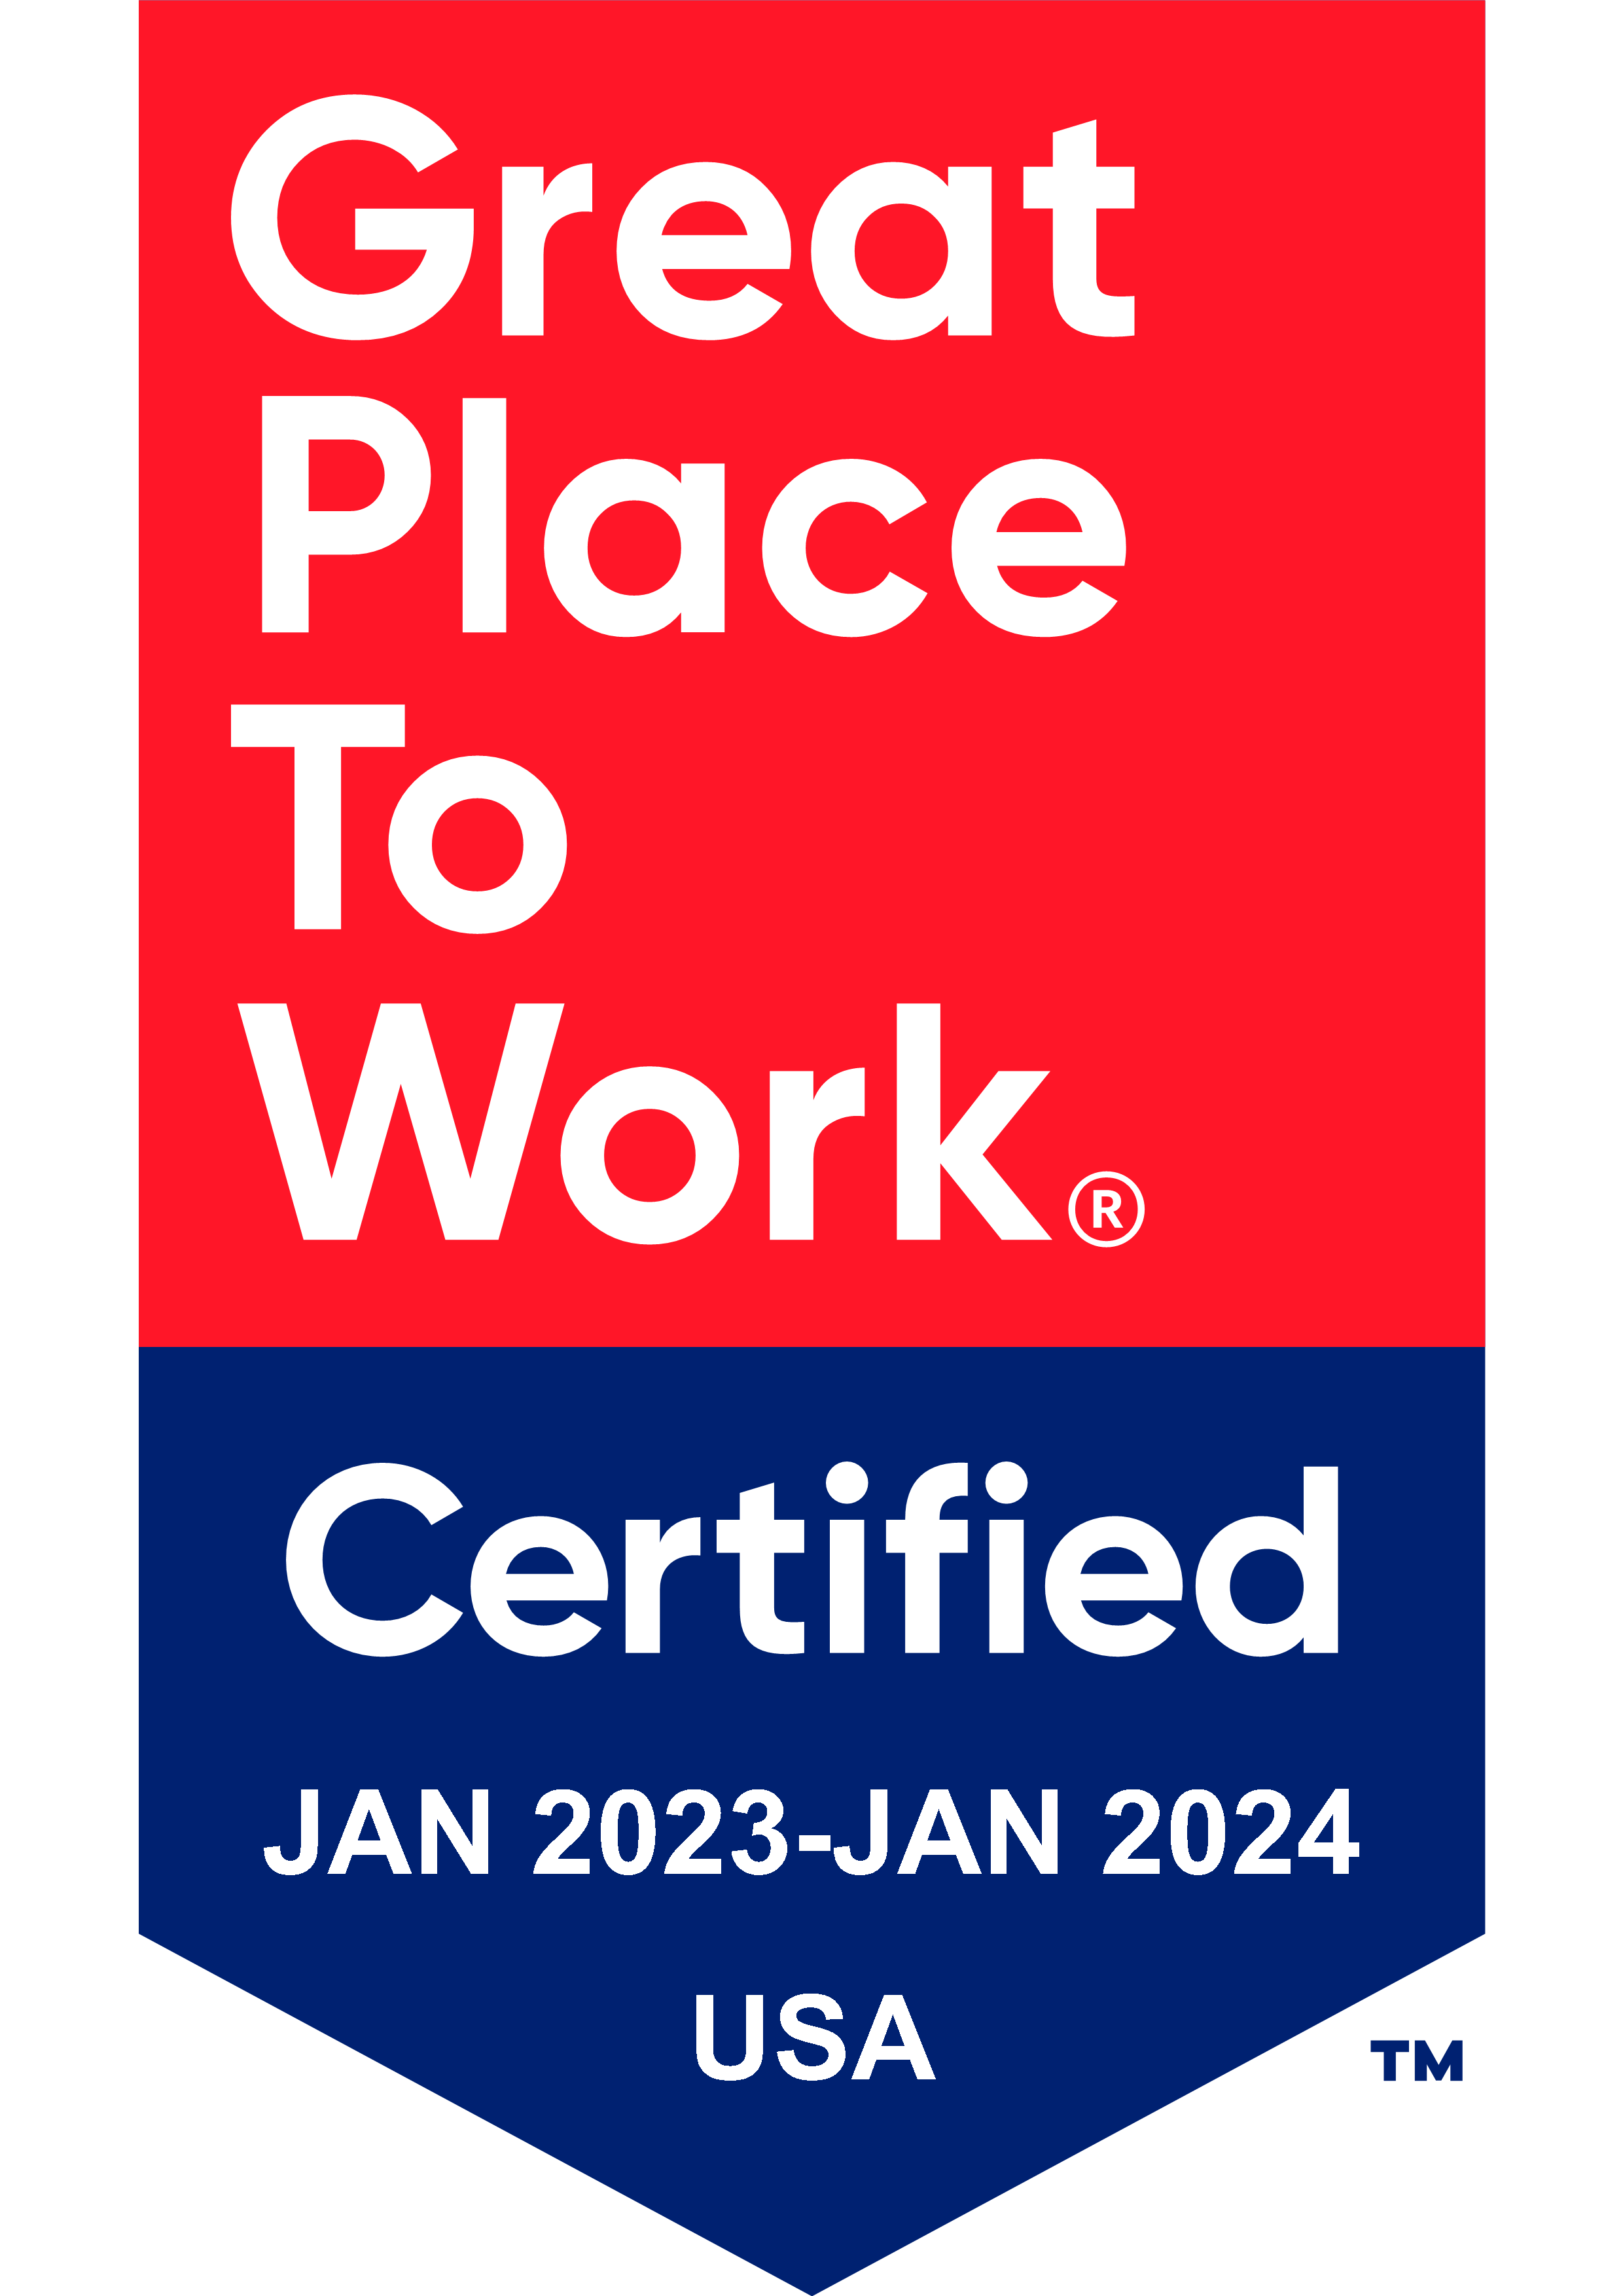 The Conrad N. Hilton Foundation has been recognized as a Great Place to Work